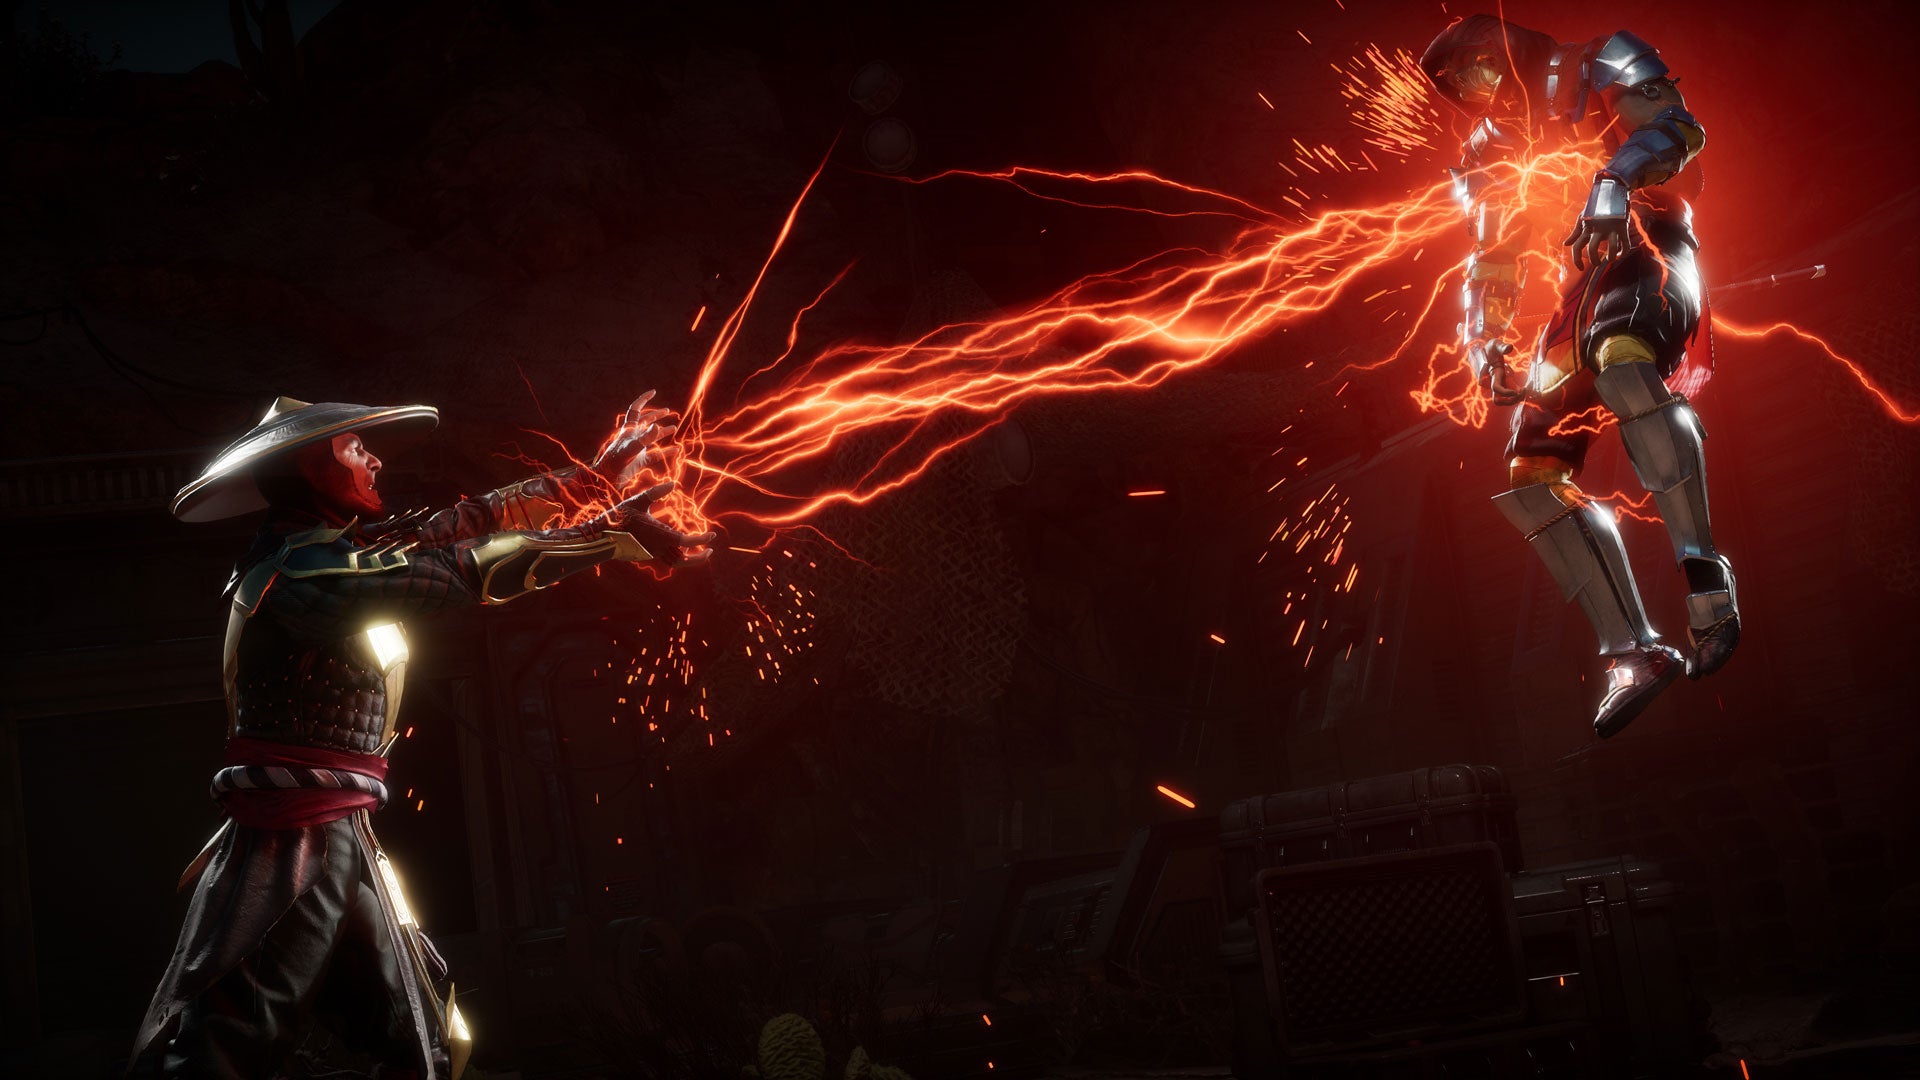 Mortal Kombat 11 Devs Are Looking Into Ongoing Threat Of DDoS Attacks